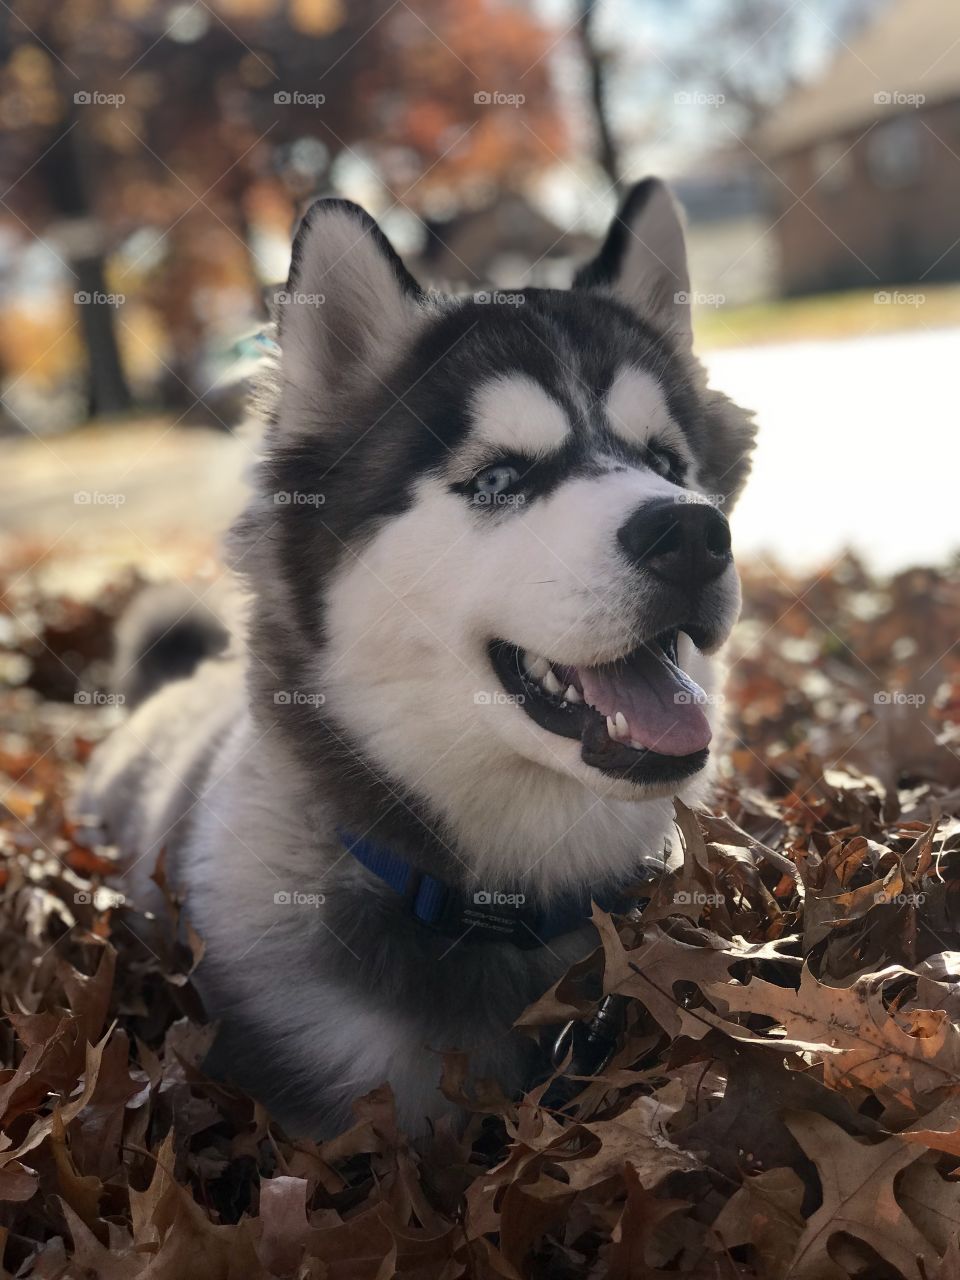 Adorable husky puppy in leaves with a big smile on his face.